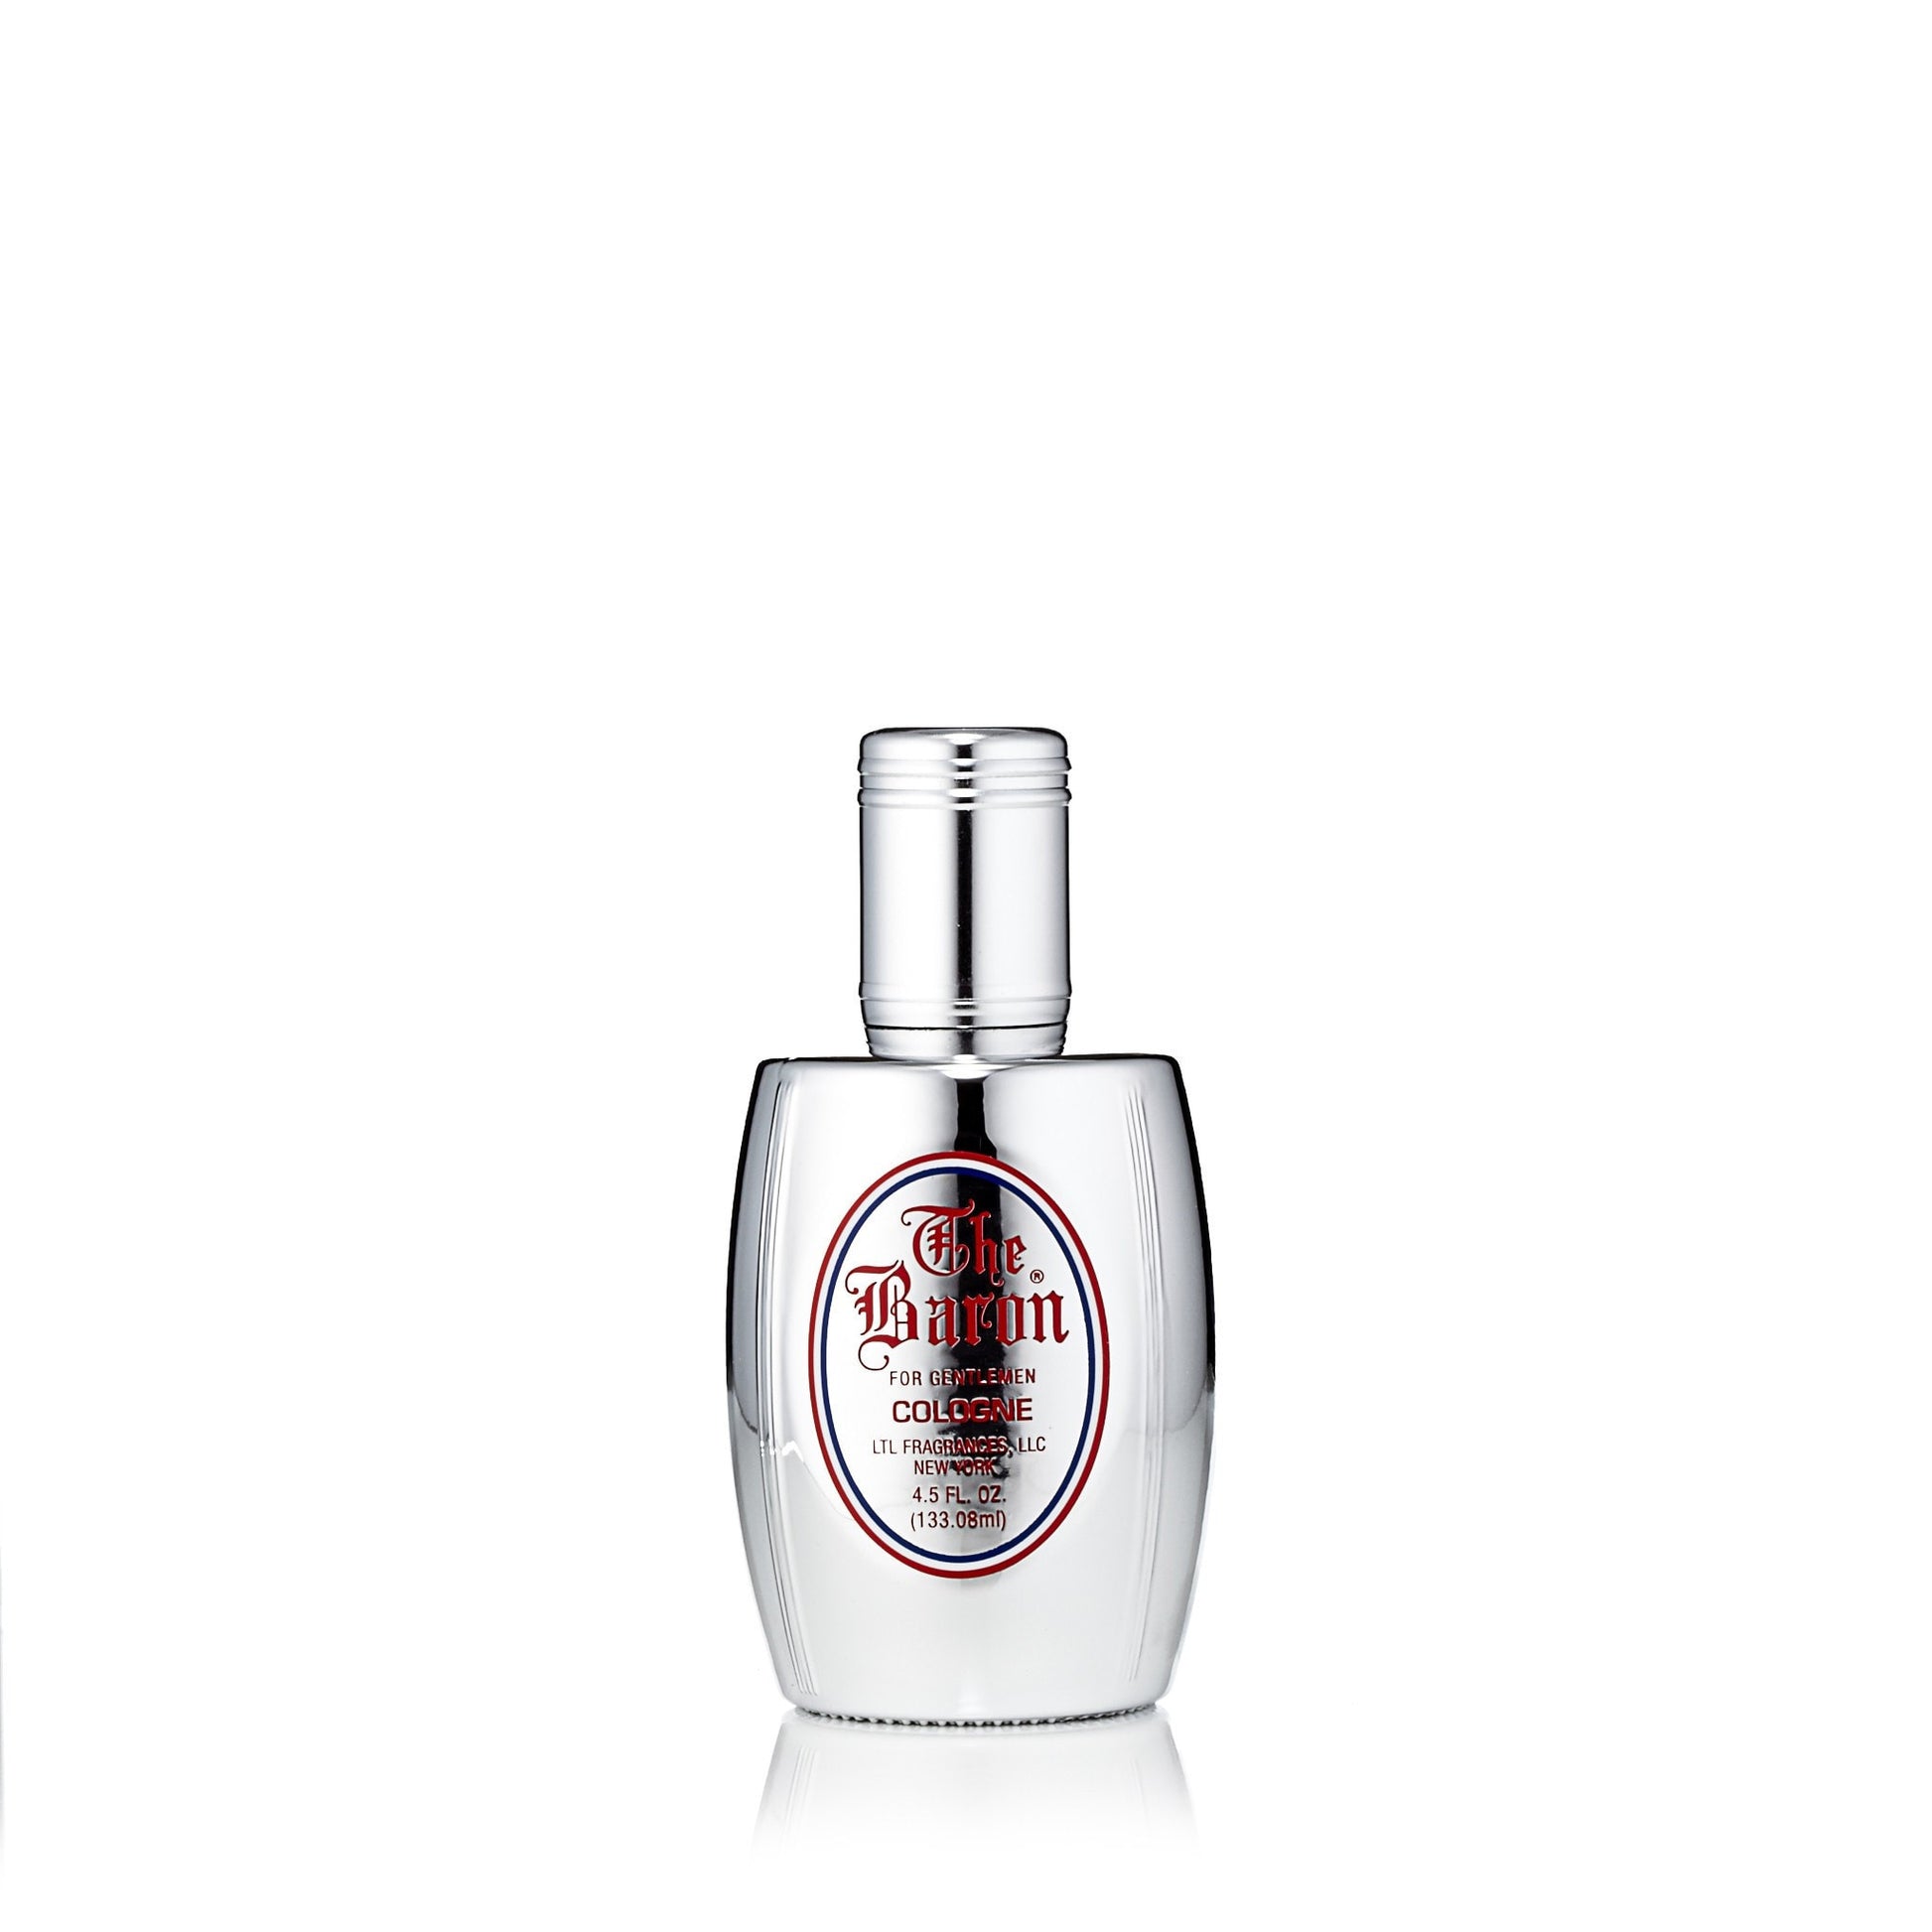 The Baron Cologne Spray for Men by LTL 4.5 oz. Click to open in modal